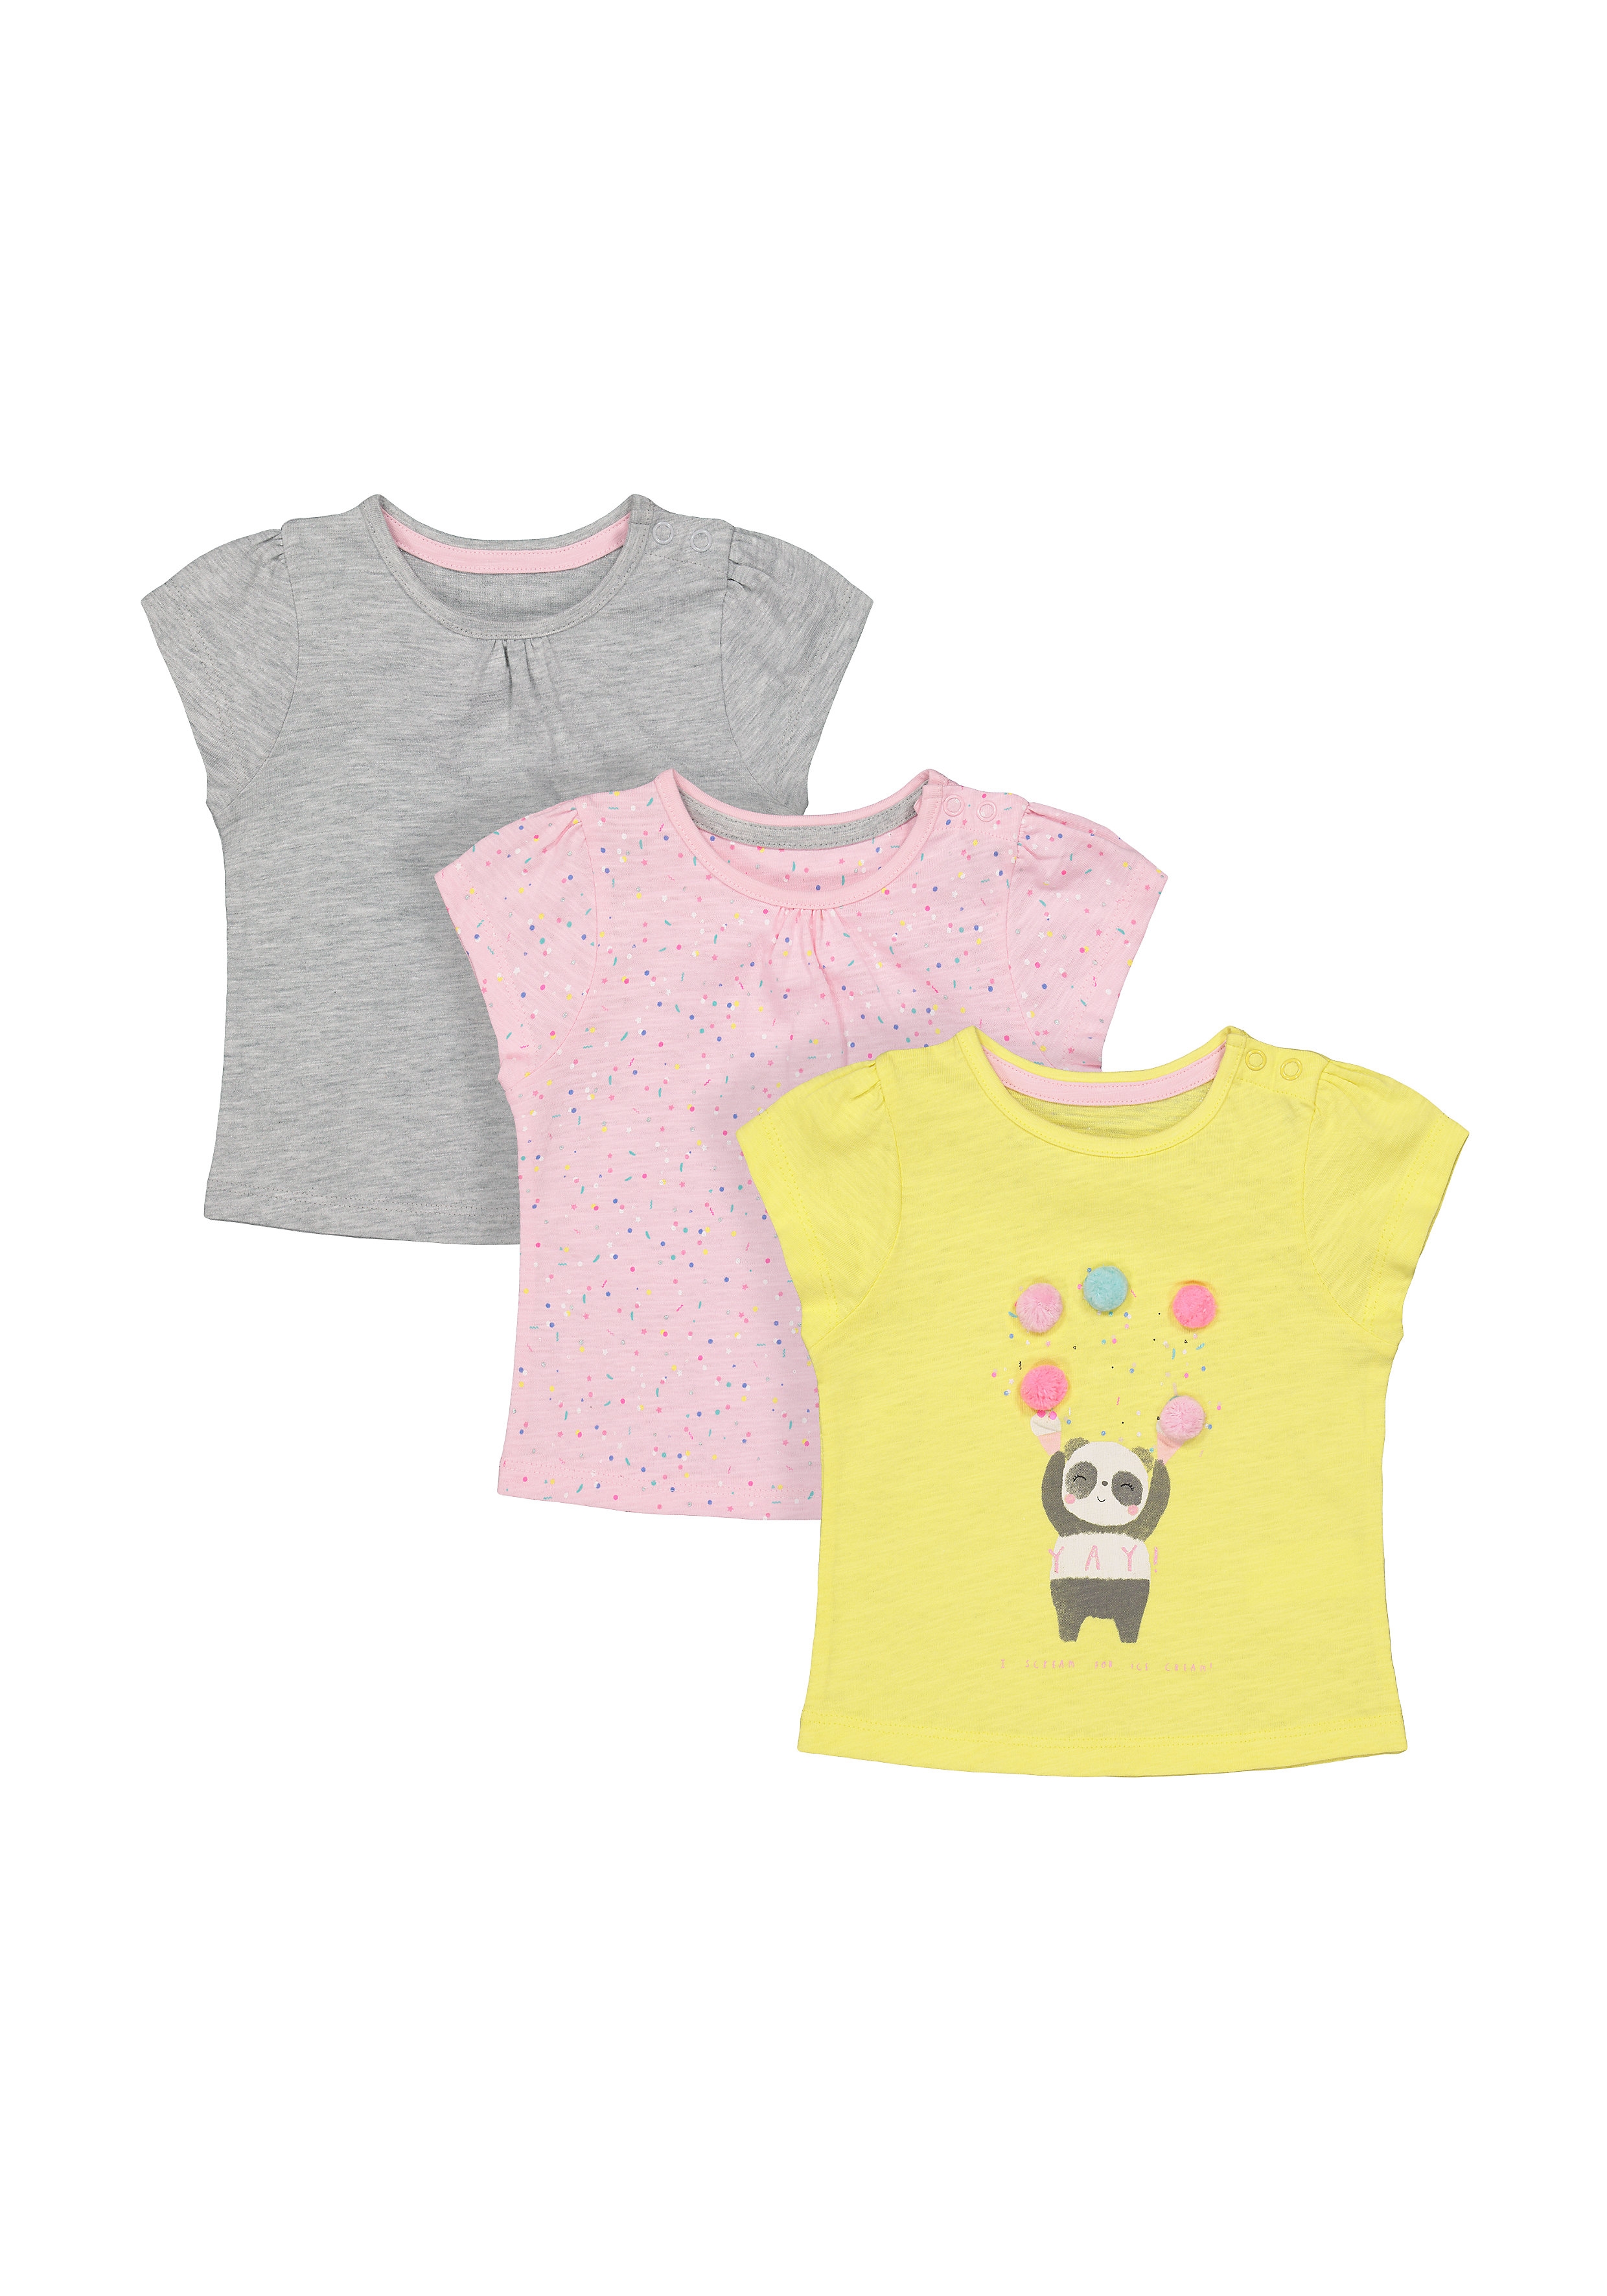 Mothercare | Girls Half Sleeves Round Neck T-shirts  - Pack Of 3 - White